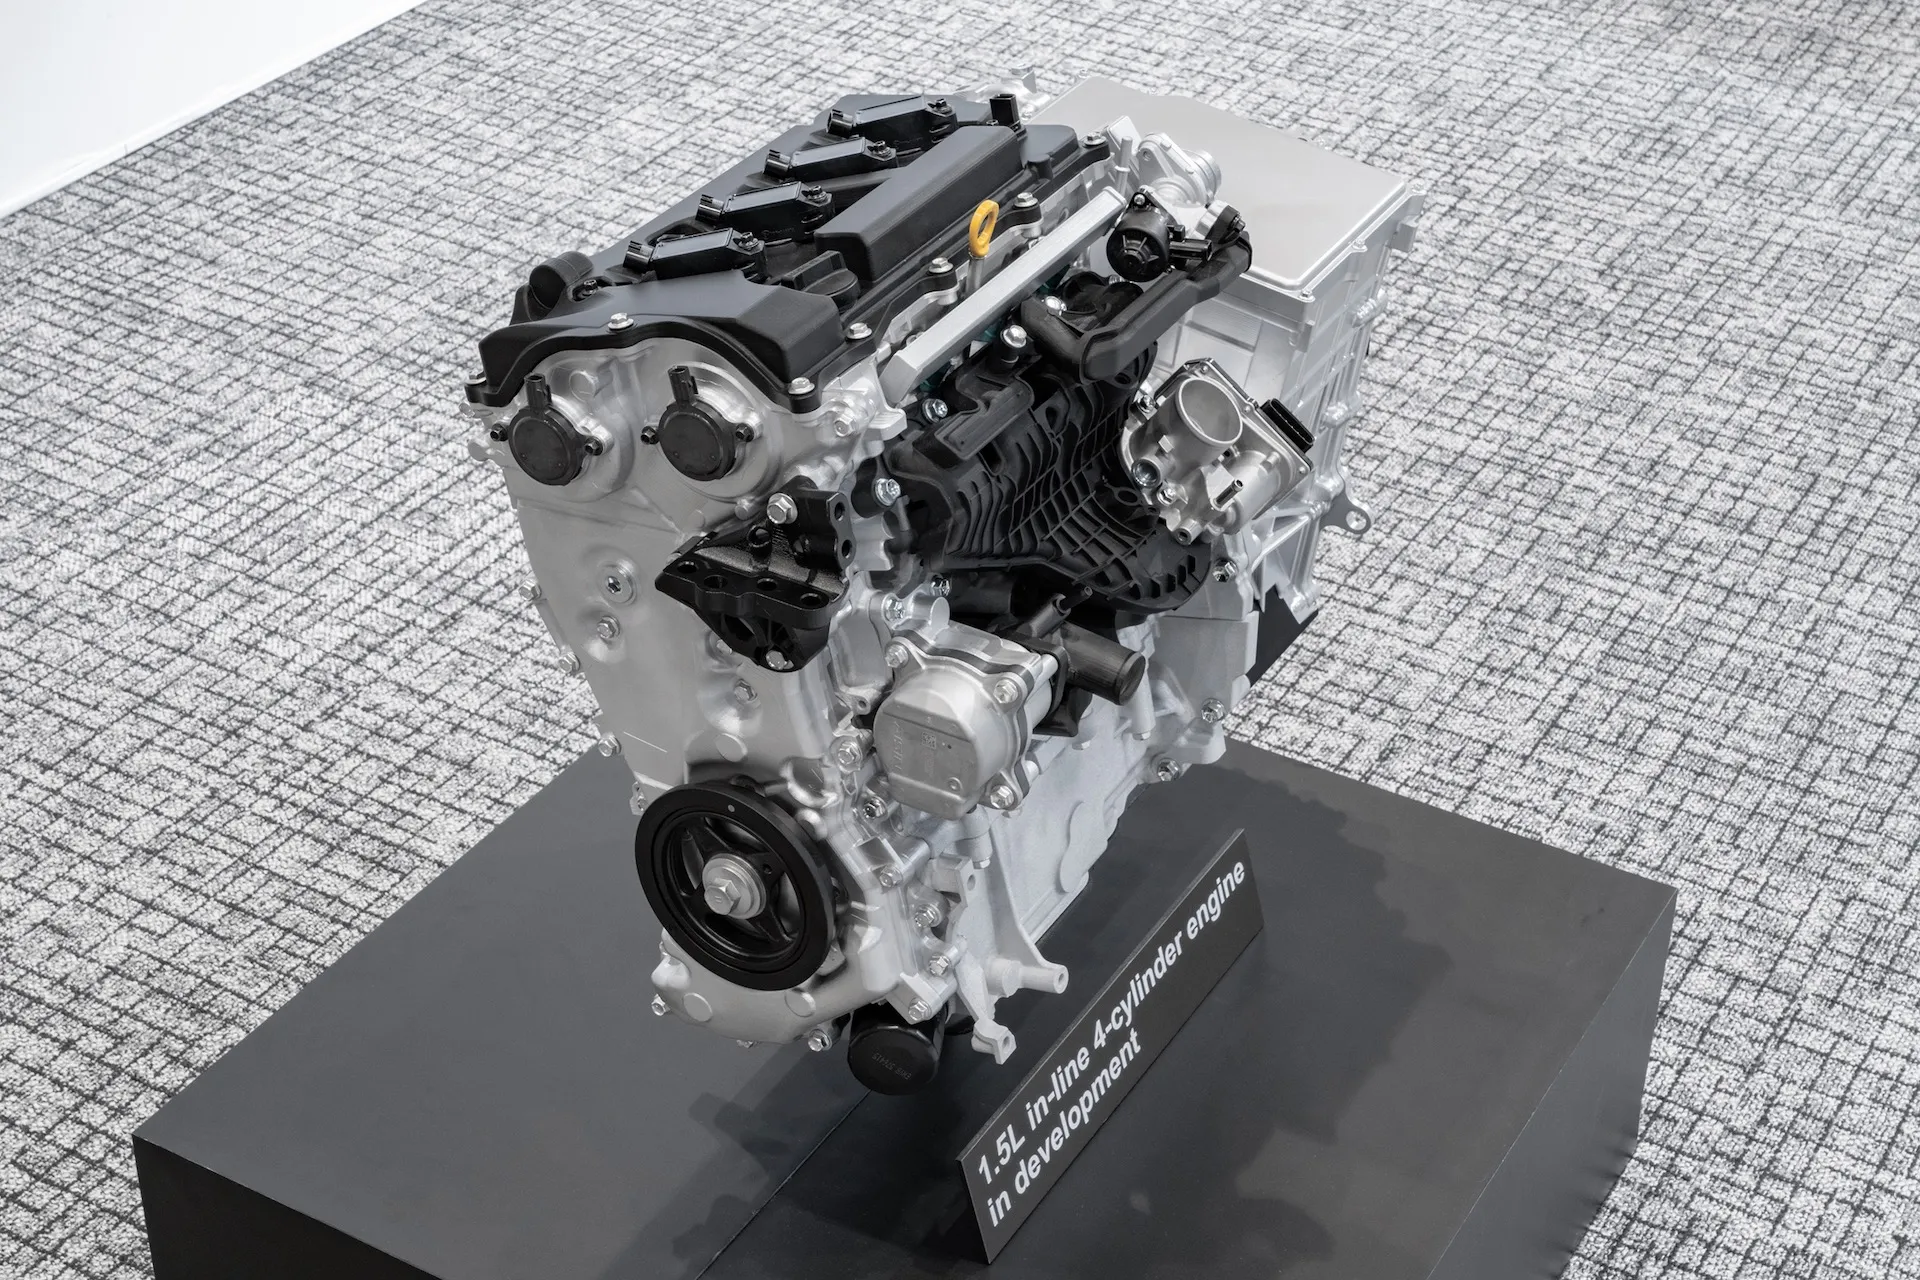 Toyota, Subaru, and Mazda join forces for engine development Auto Recent